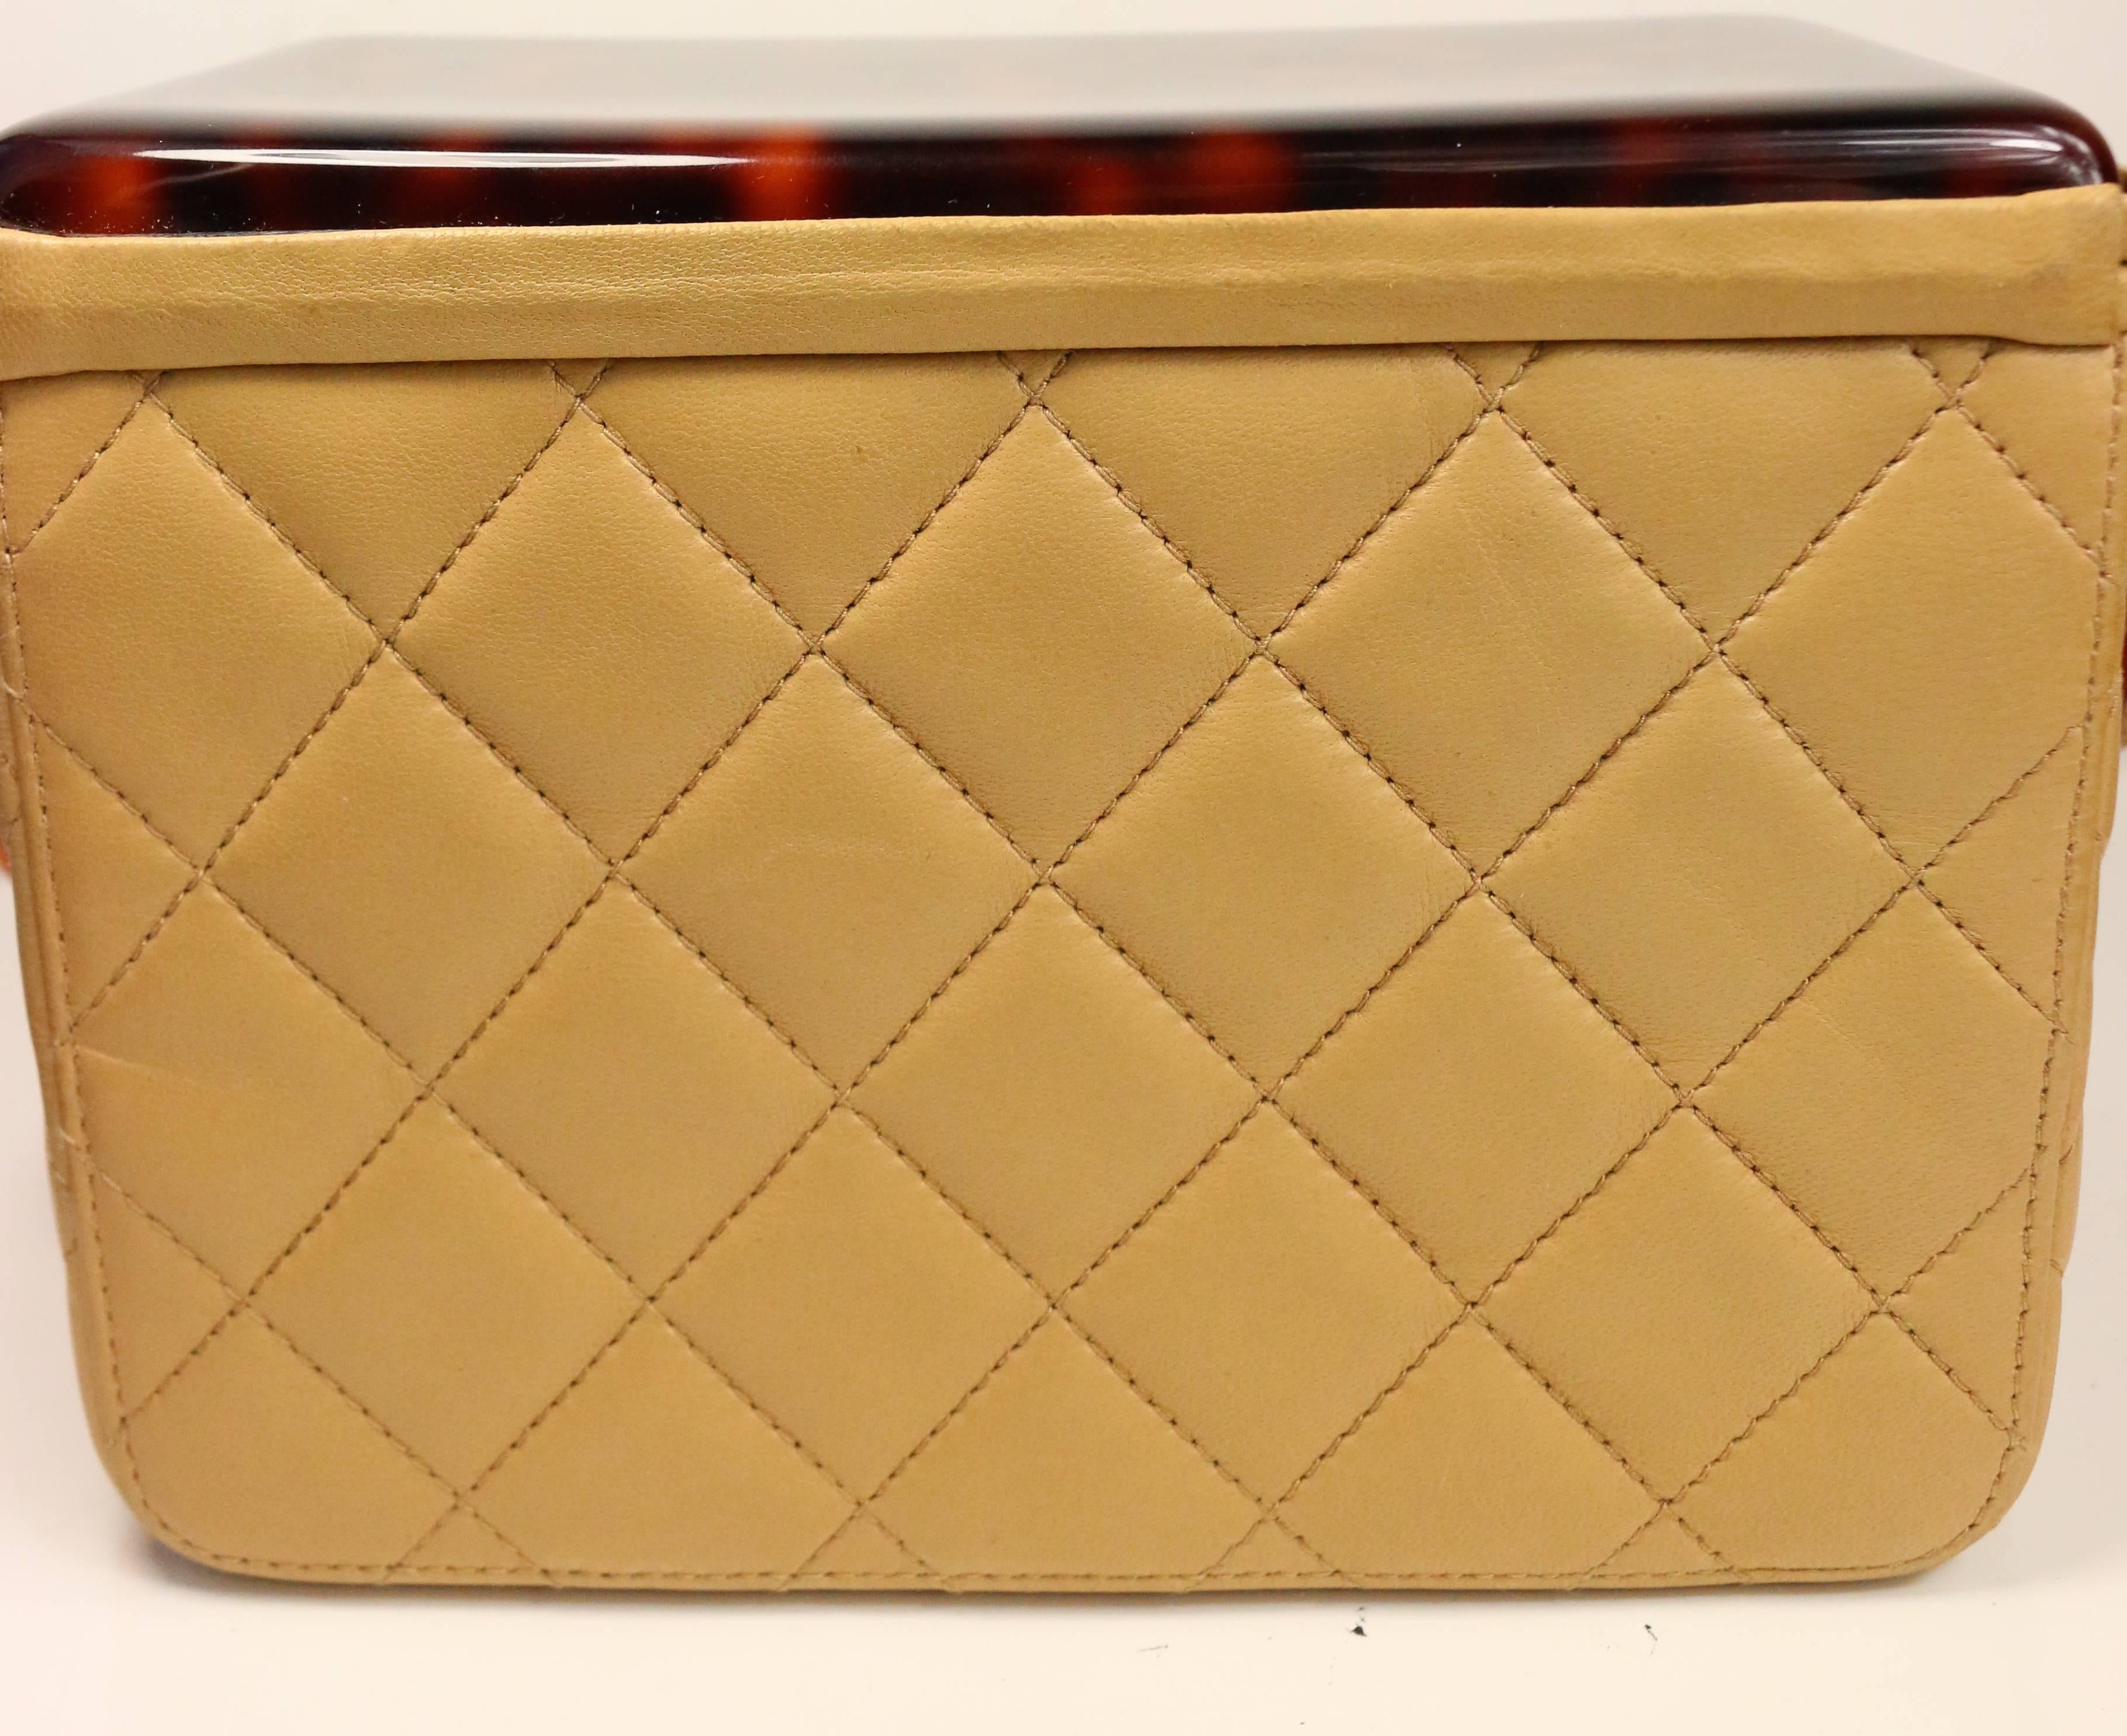 - Chanel beige leather quilted tortoise lucite top box bag from 1996 collection. 

- Boxy design with a unique tortoise shell resin top. 

- Lucite/leather entwined handles. 

- Interior lining is leather. 

- with Authenticity card. 

- Length: